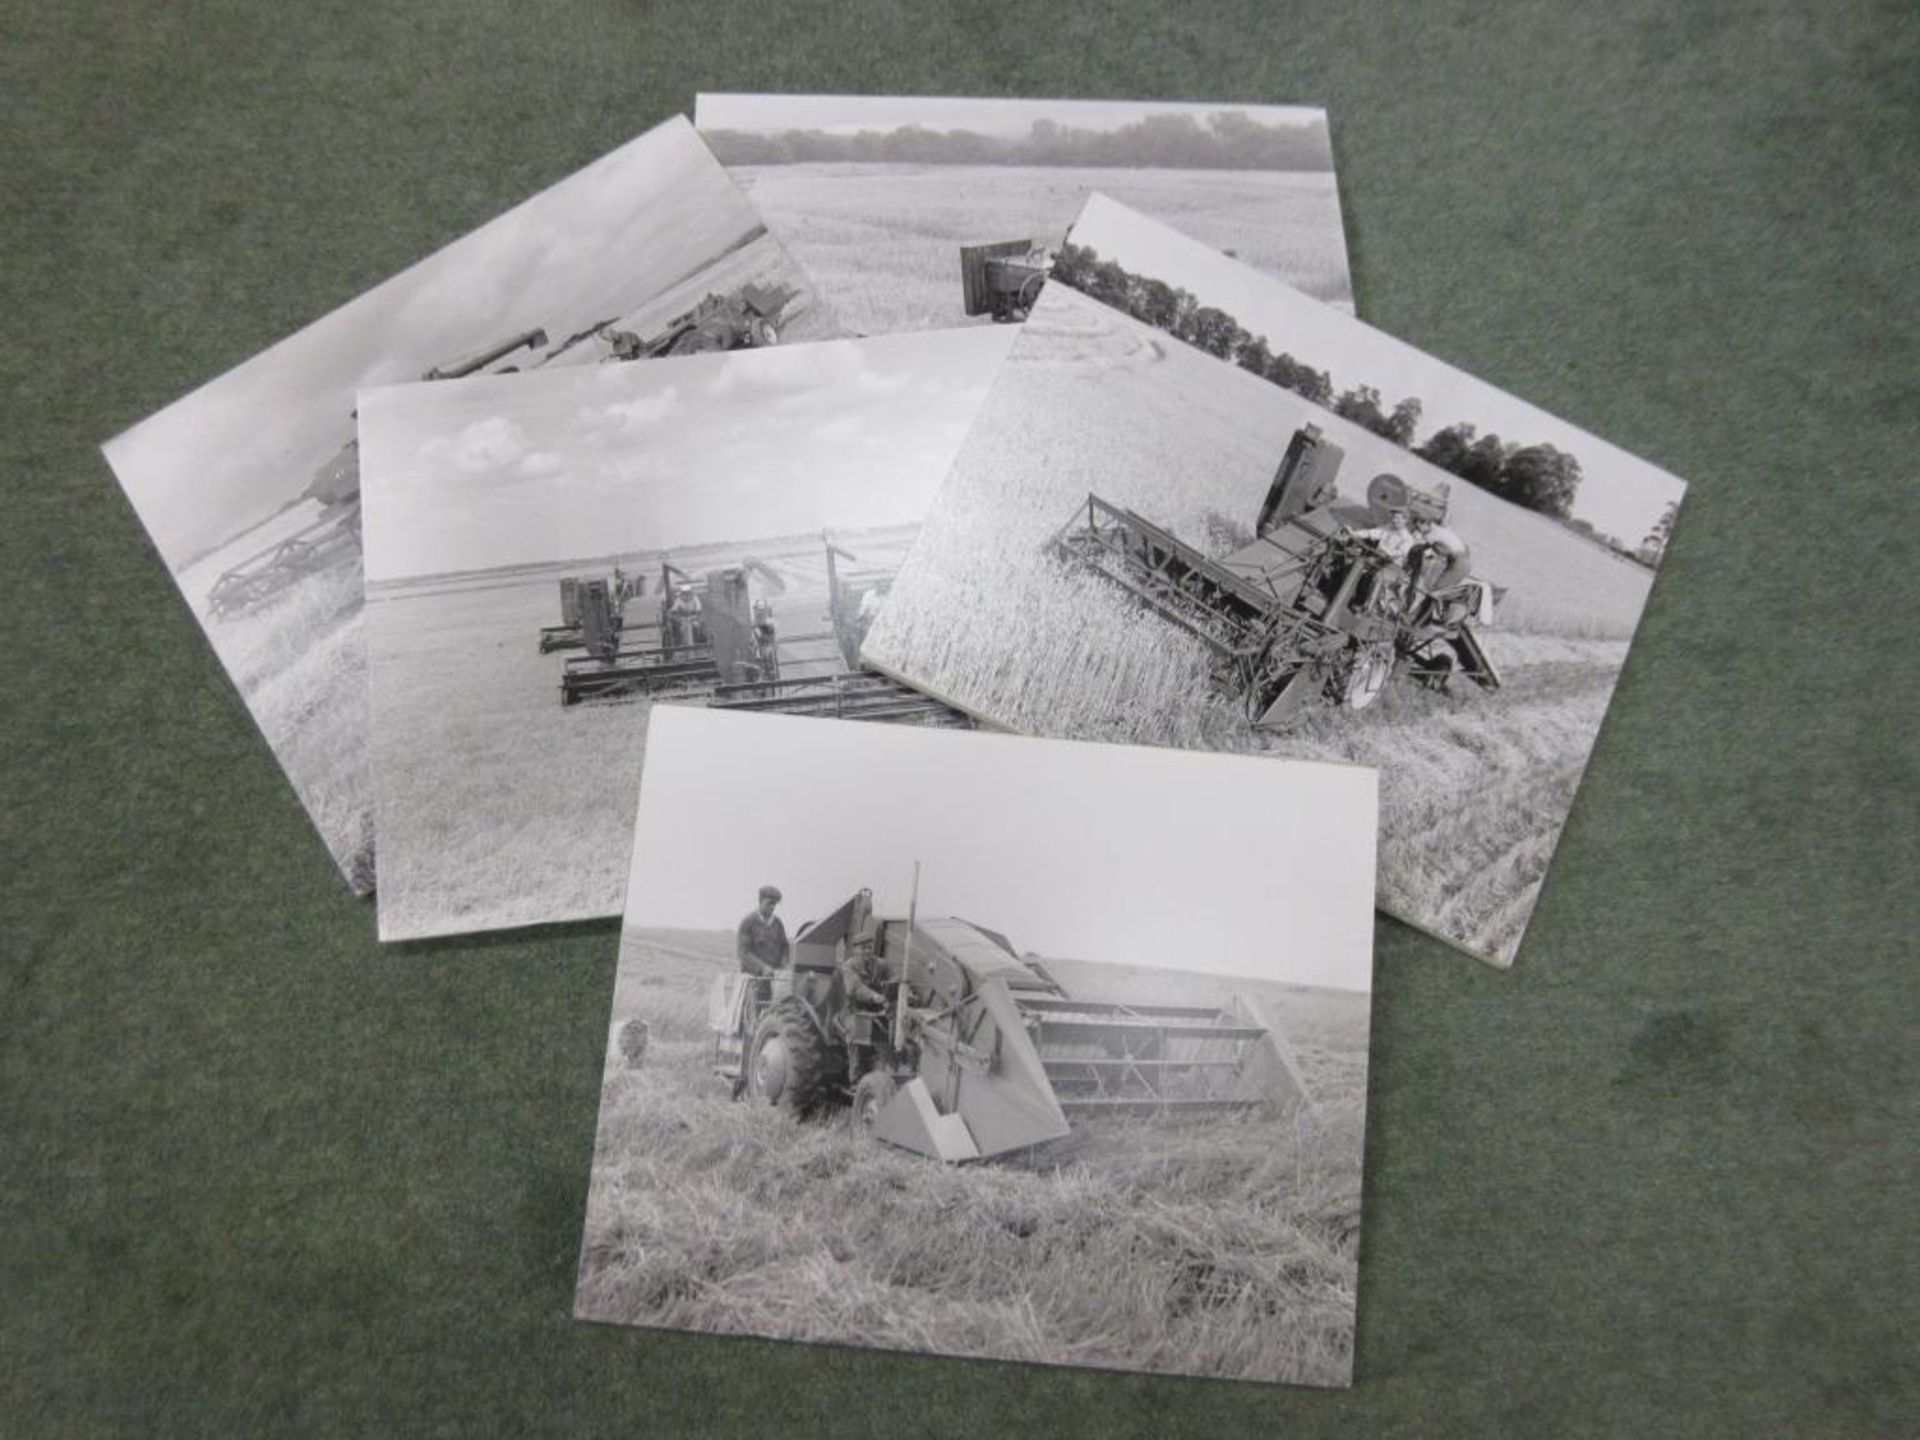 6no polystyrene boards depicting black and white images of a Ferguson combine, Massey Harris and